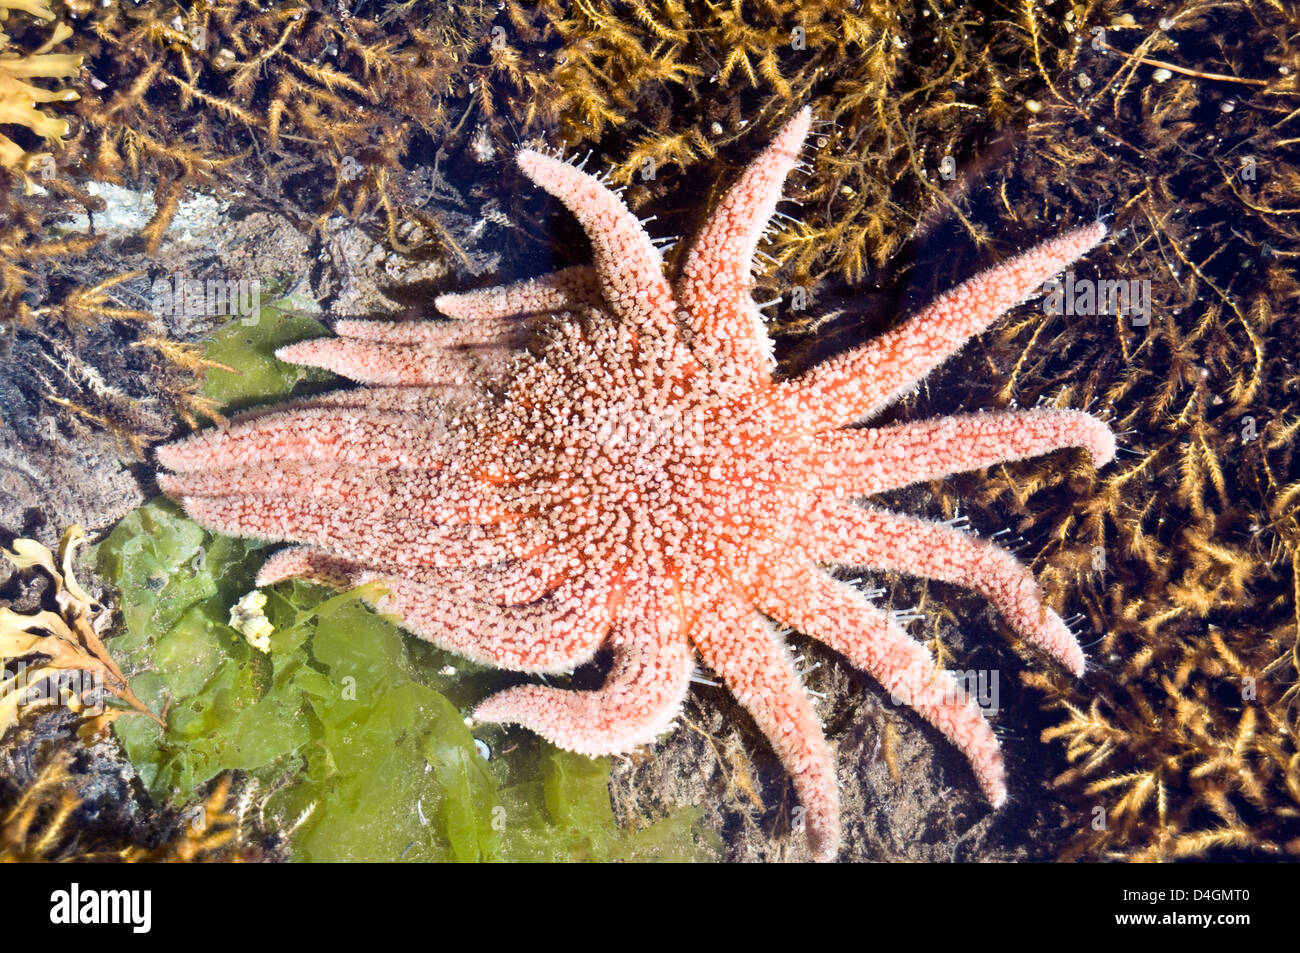 A living starfish in a tidal pool on the shore of Swindle Island, in the Great Bear Rainforest, British Columbia, Canada. Stock Photo